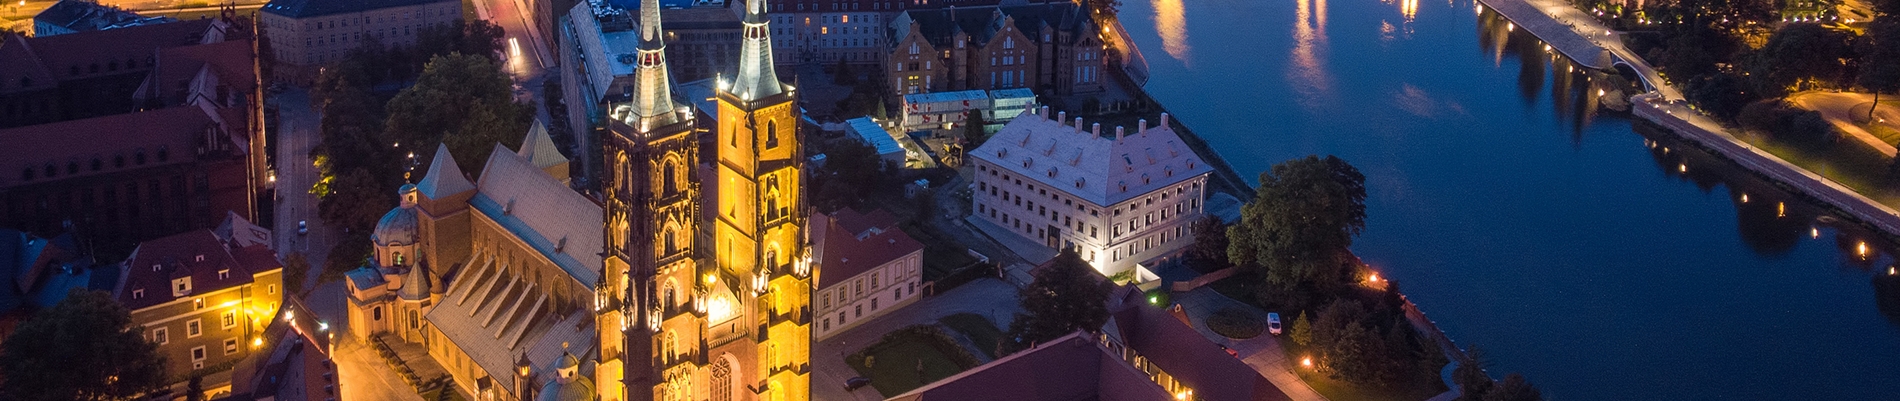 Famous Islands of Wroclaw - Cathedral and Sand Islands